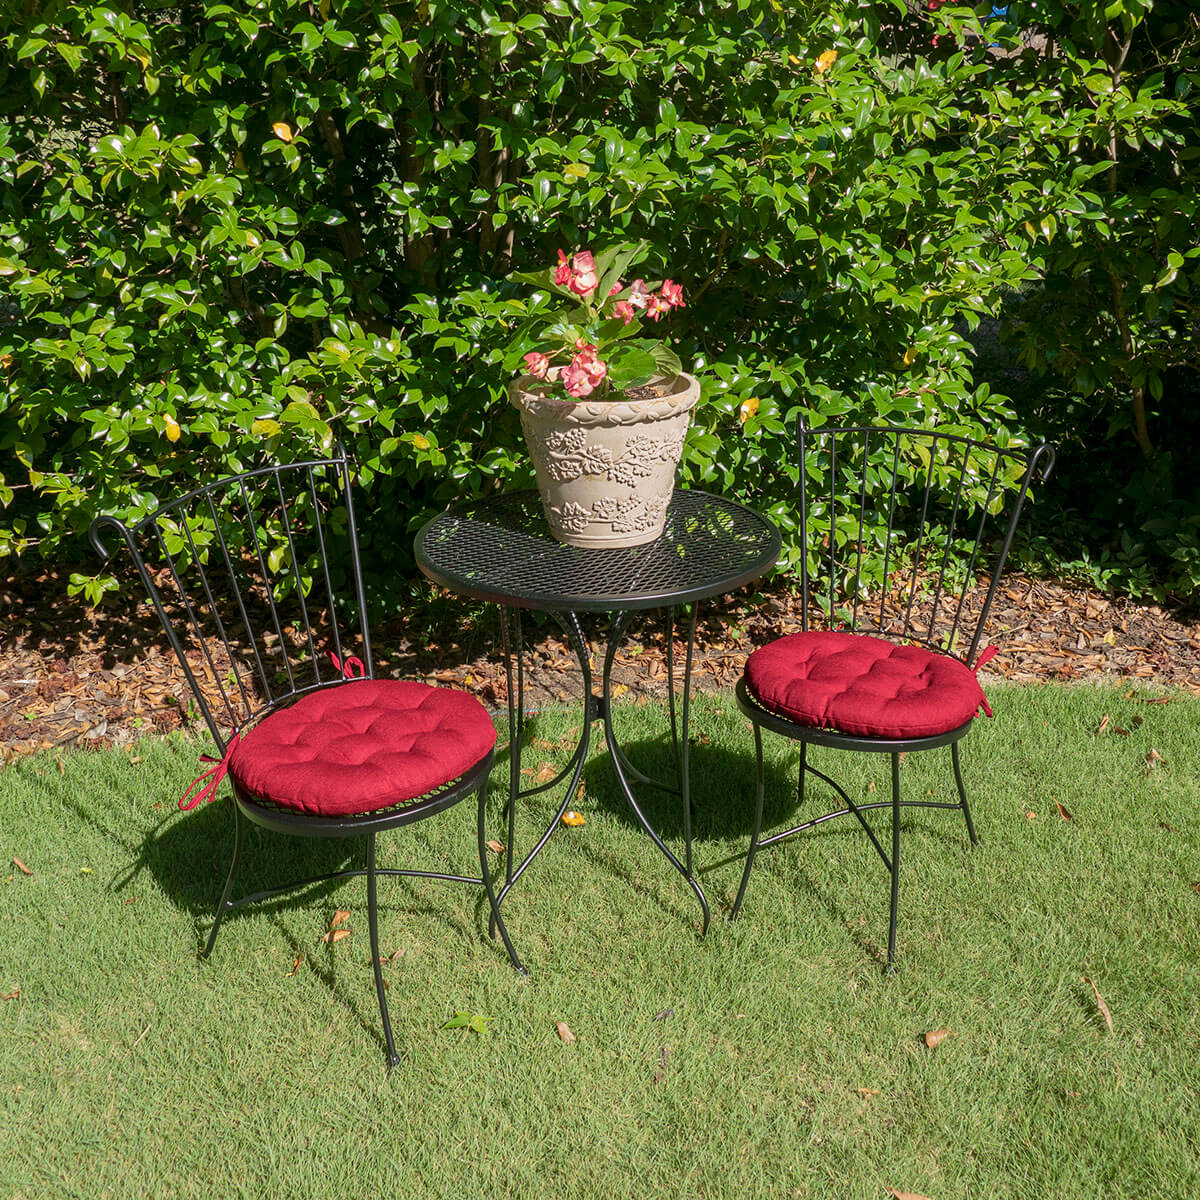 Rave Red Indoor / Outdoor Dining Chair Pads & Patio Chair Cushions